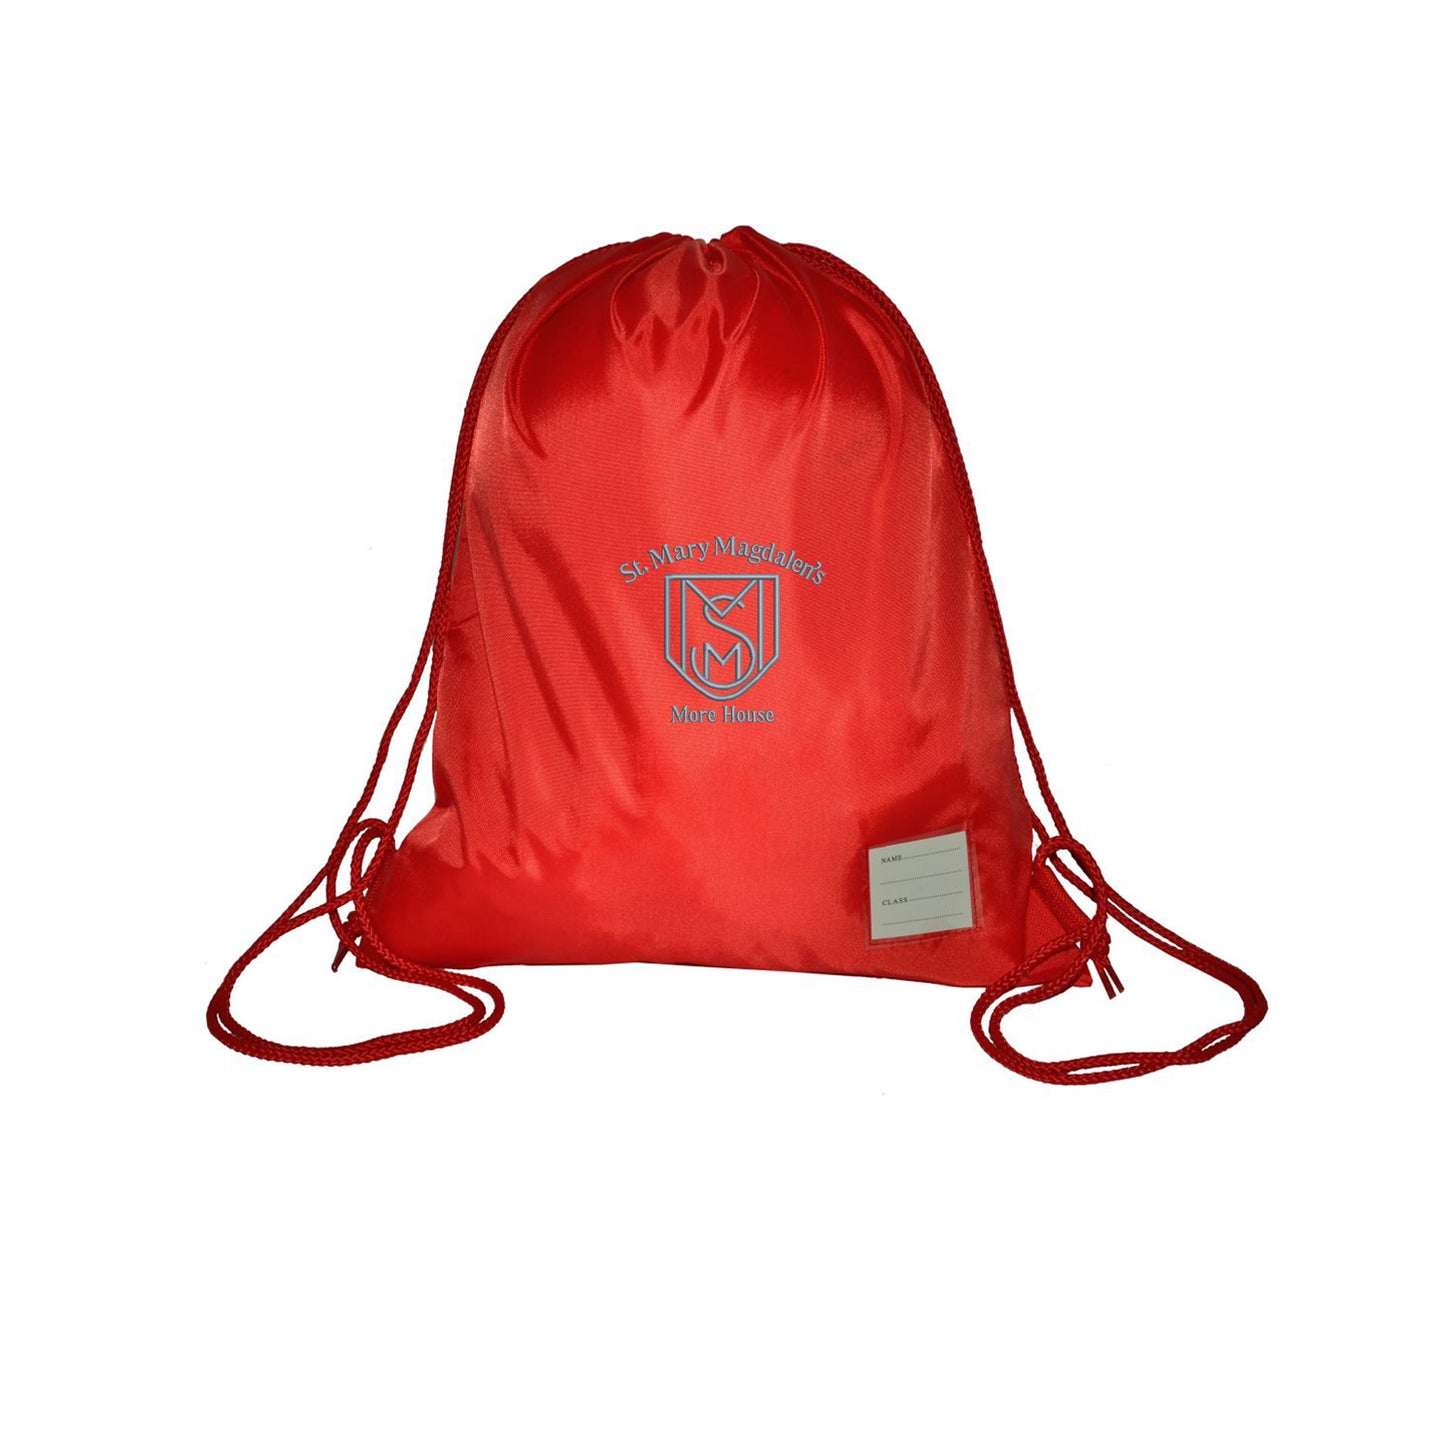 St Mary Magdalen's Junior - PE Bag - More House